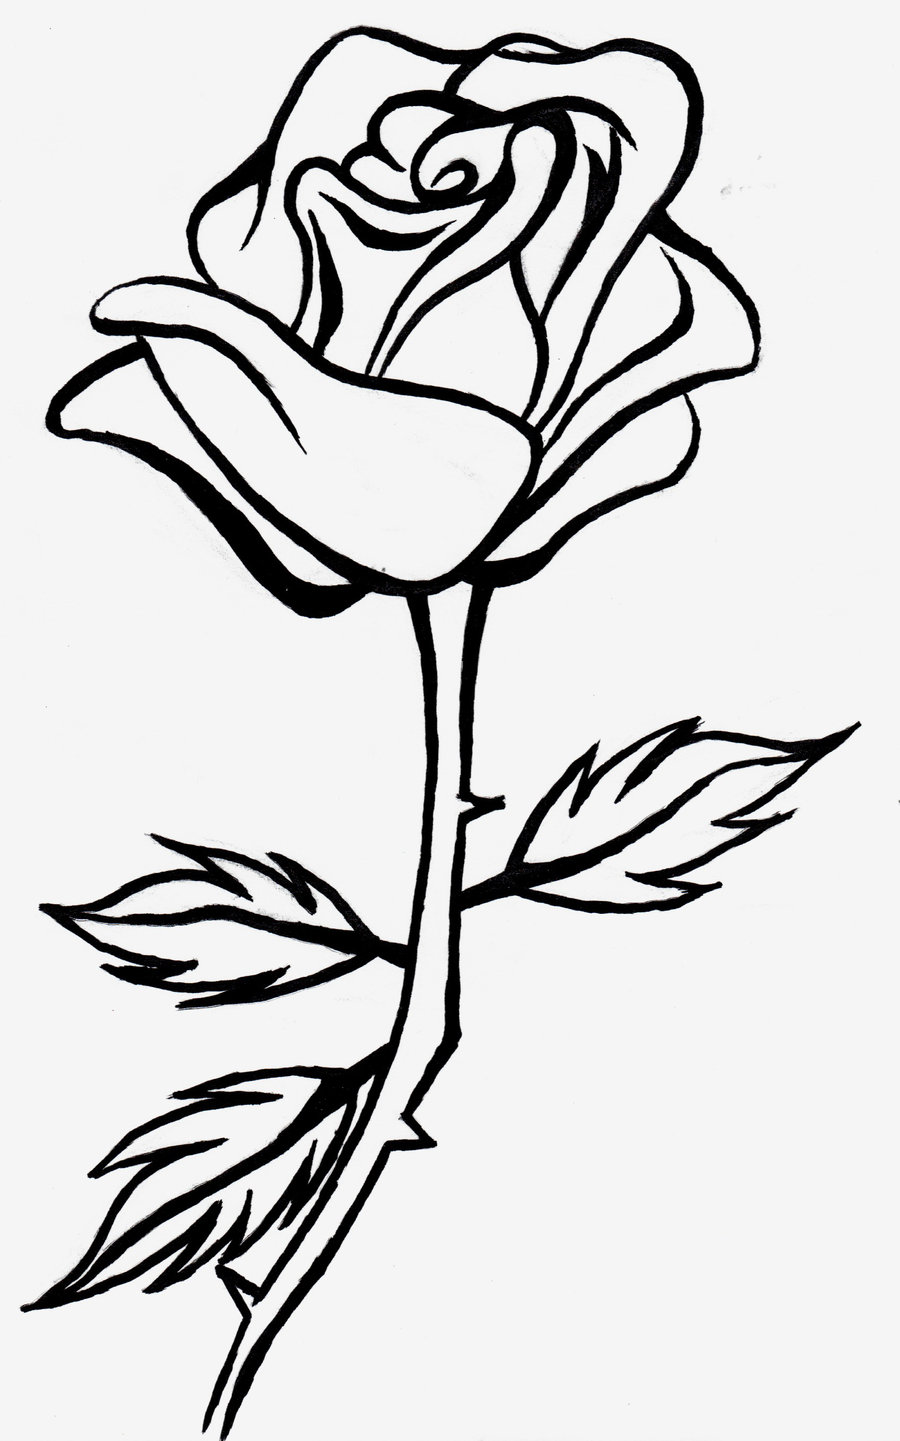 Roses free rose clipart public domain flower clip art images and 2 2